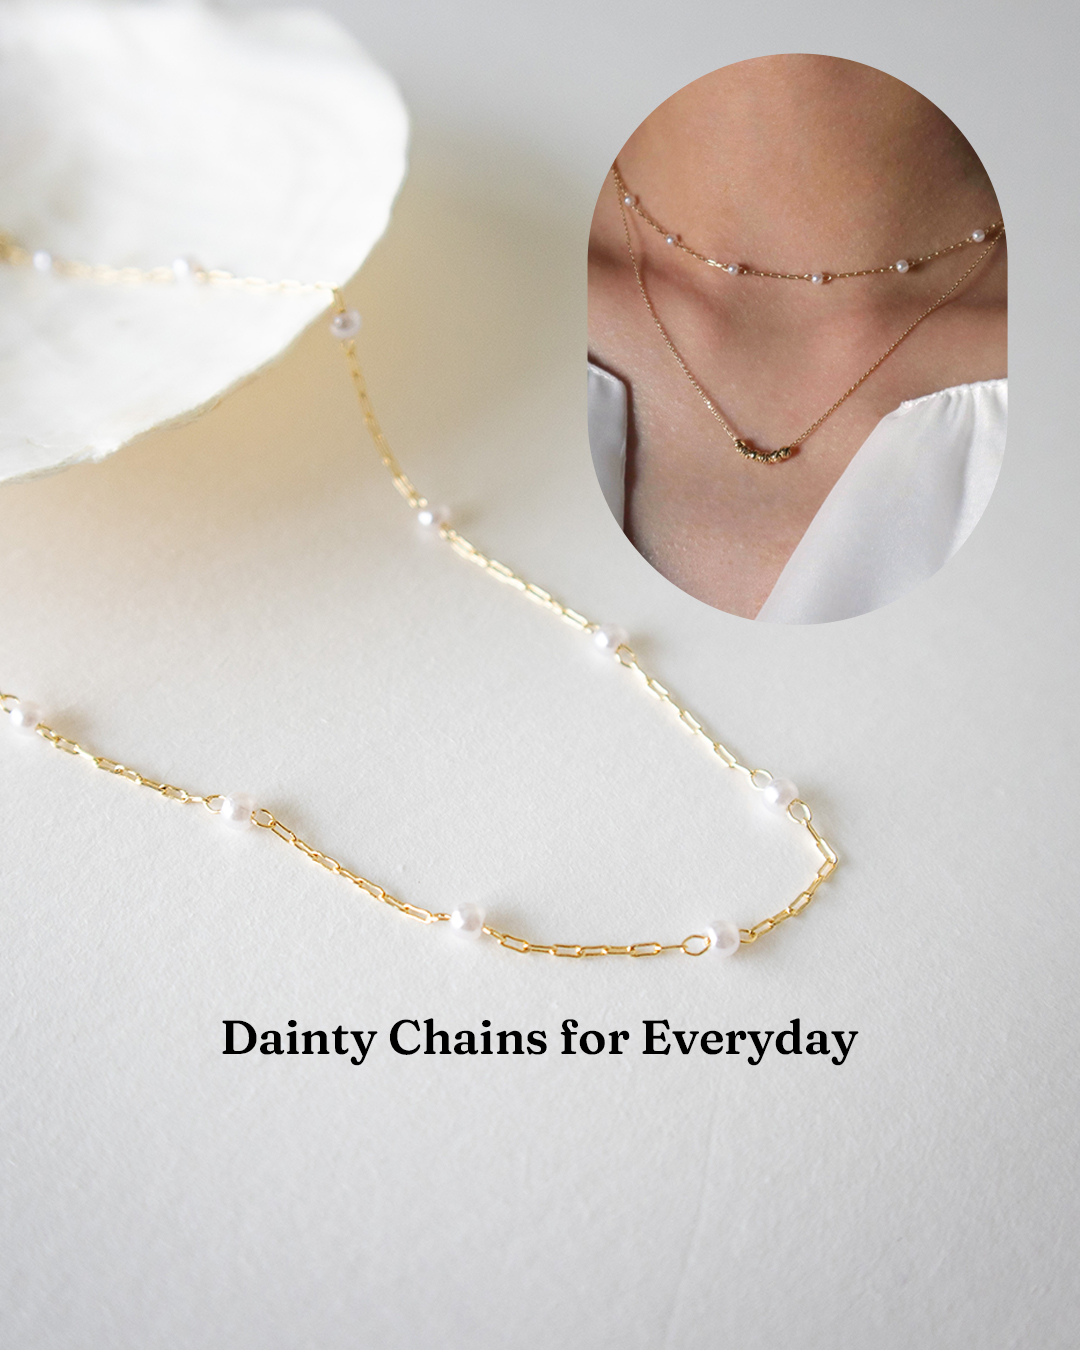 & Fine Things - Everyday classic jewelry | 